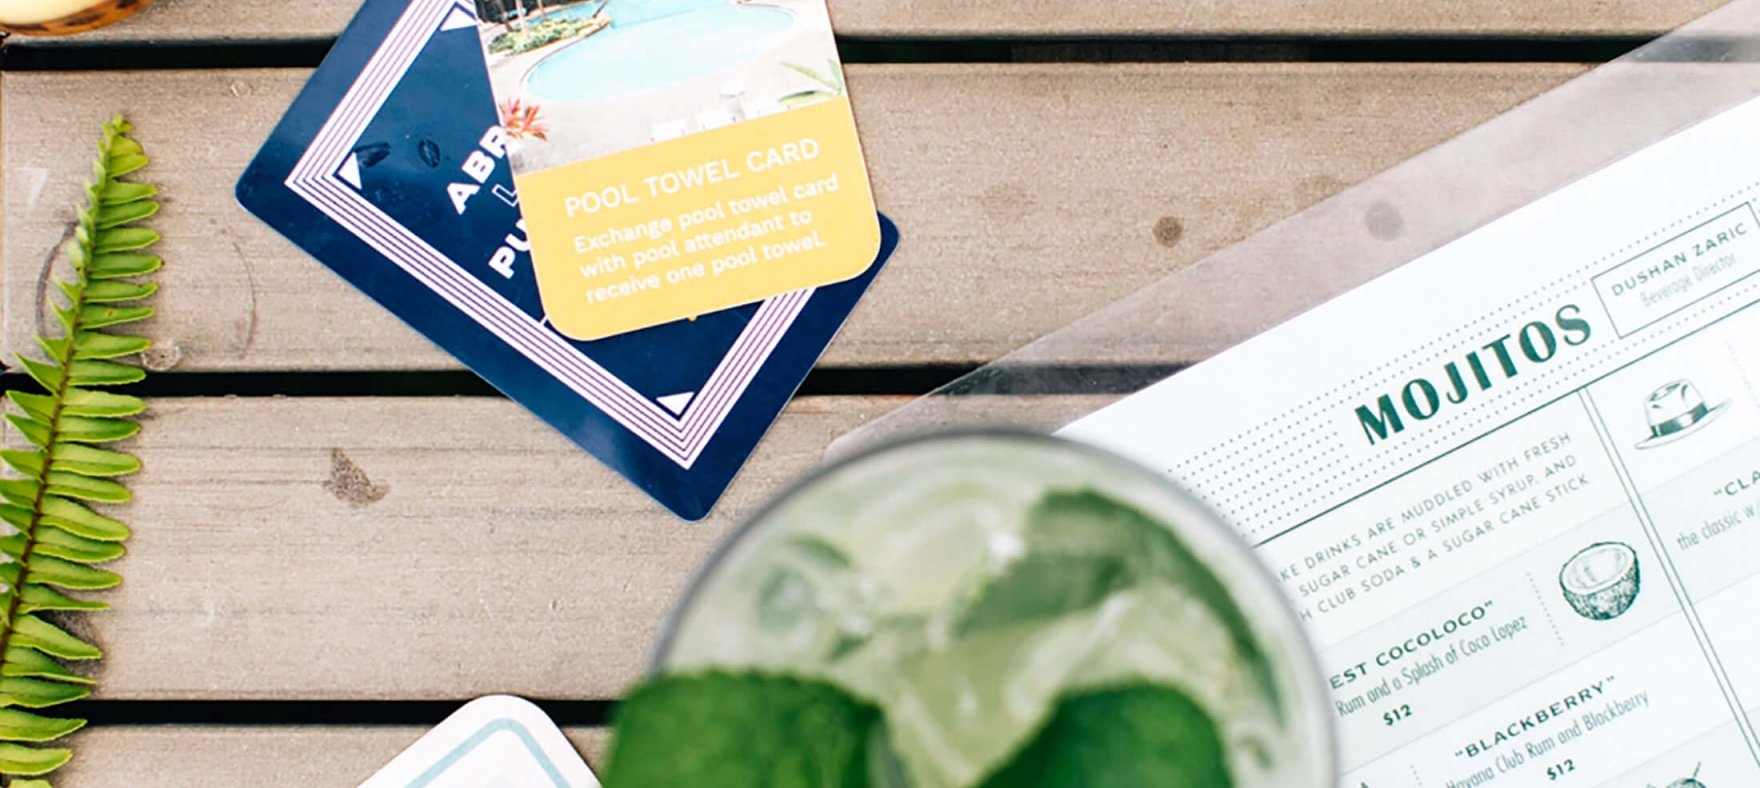 A glass of mojito is placed on top of a menu next to some cards and Pina Colada.